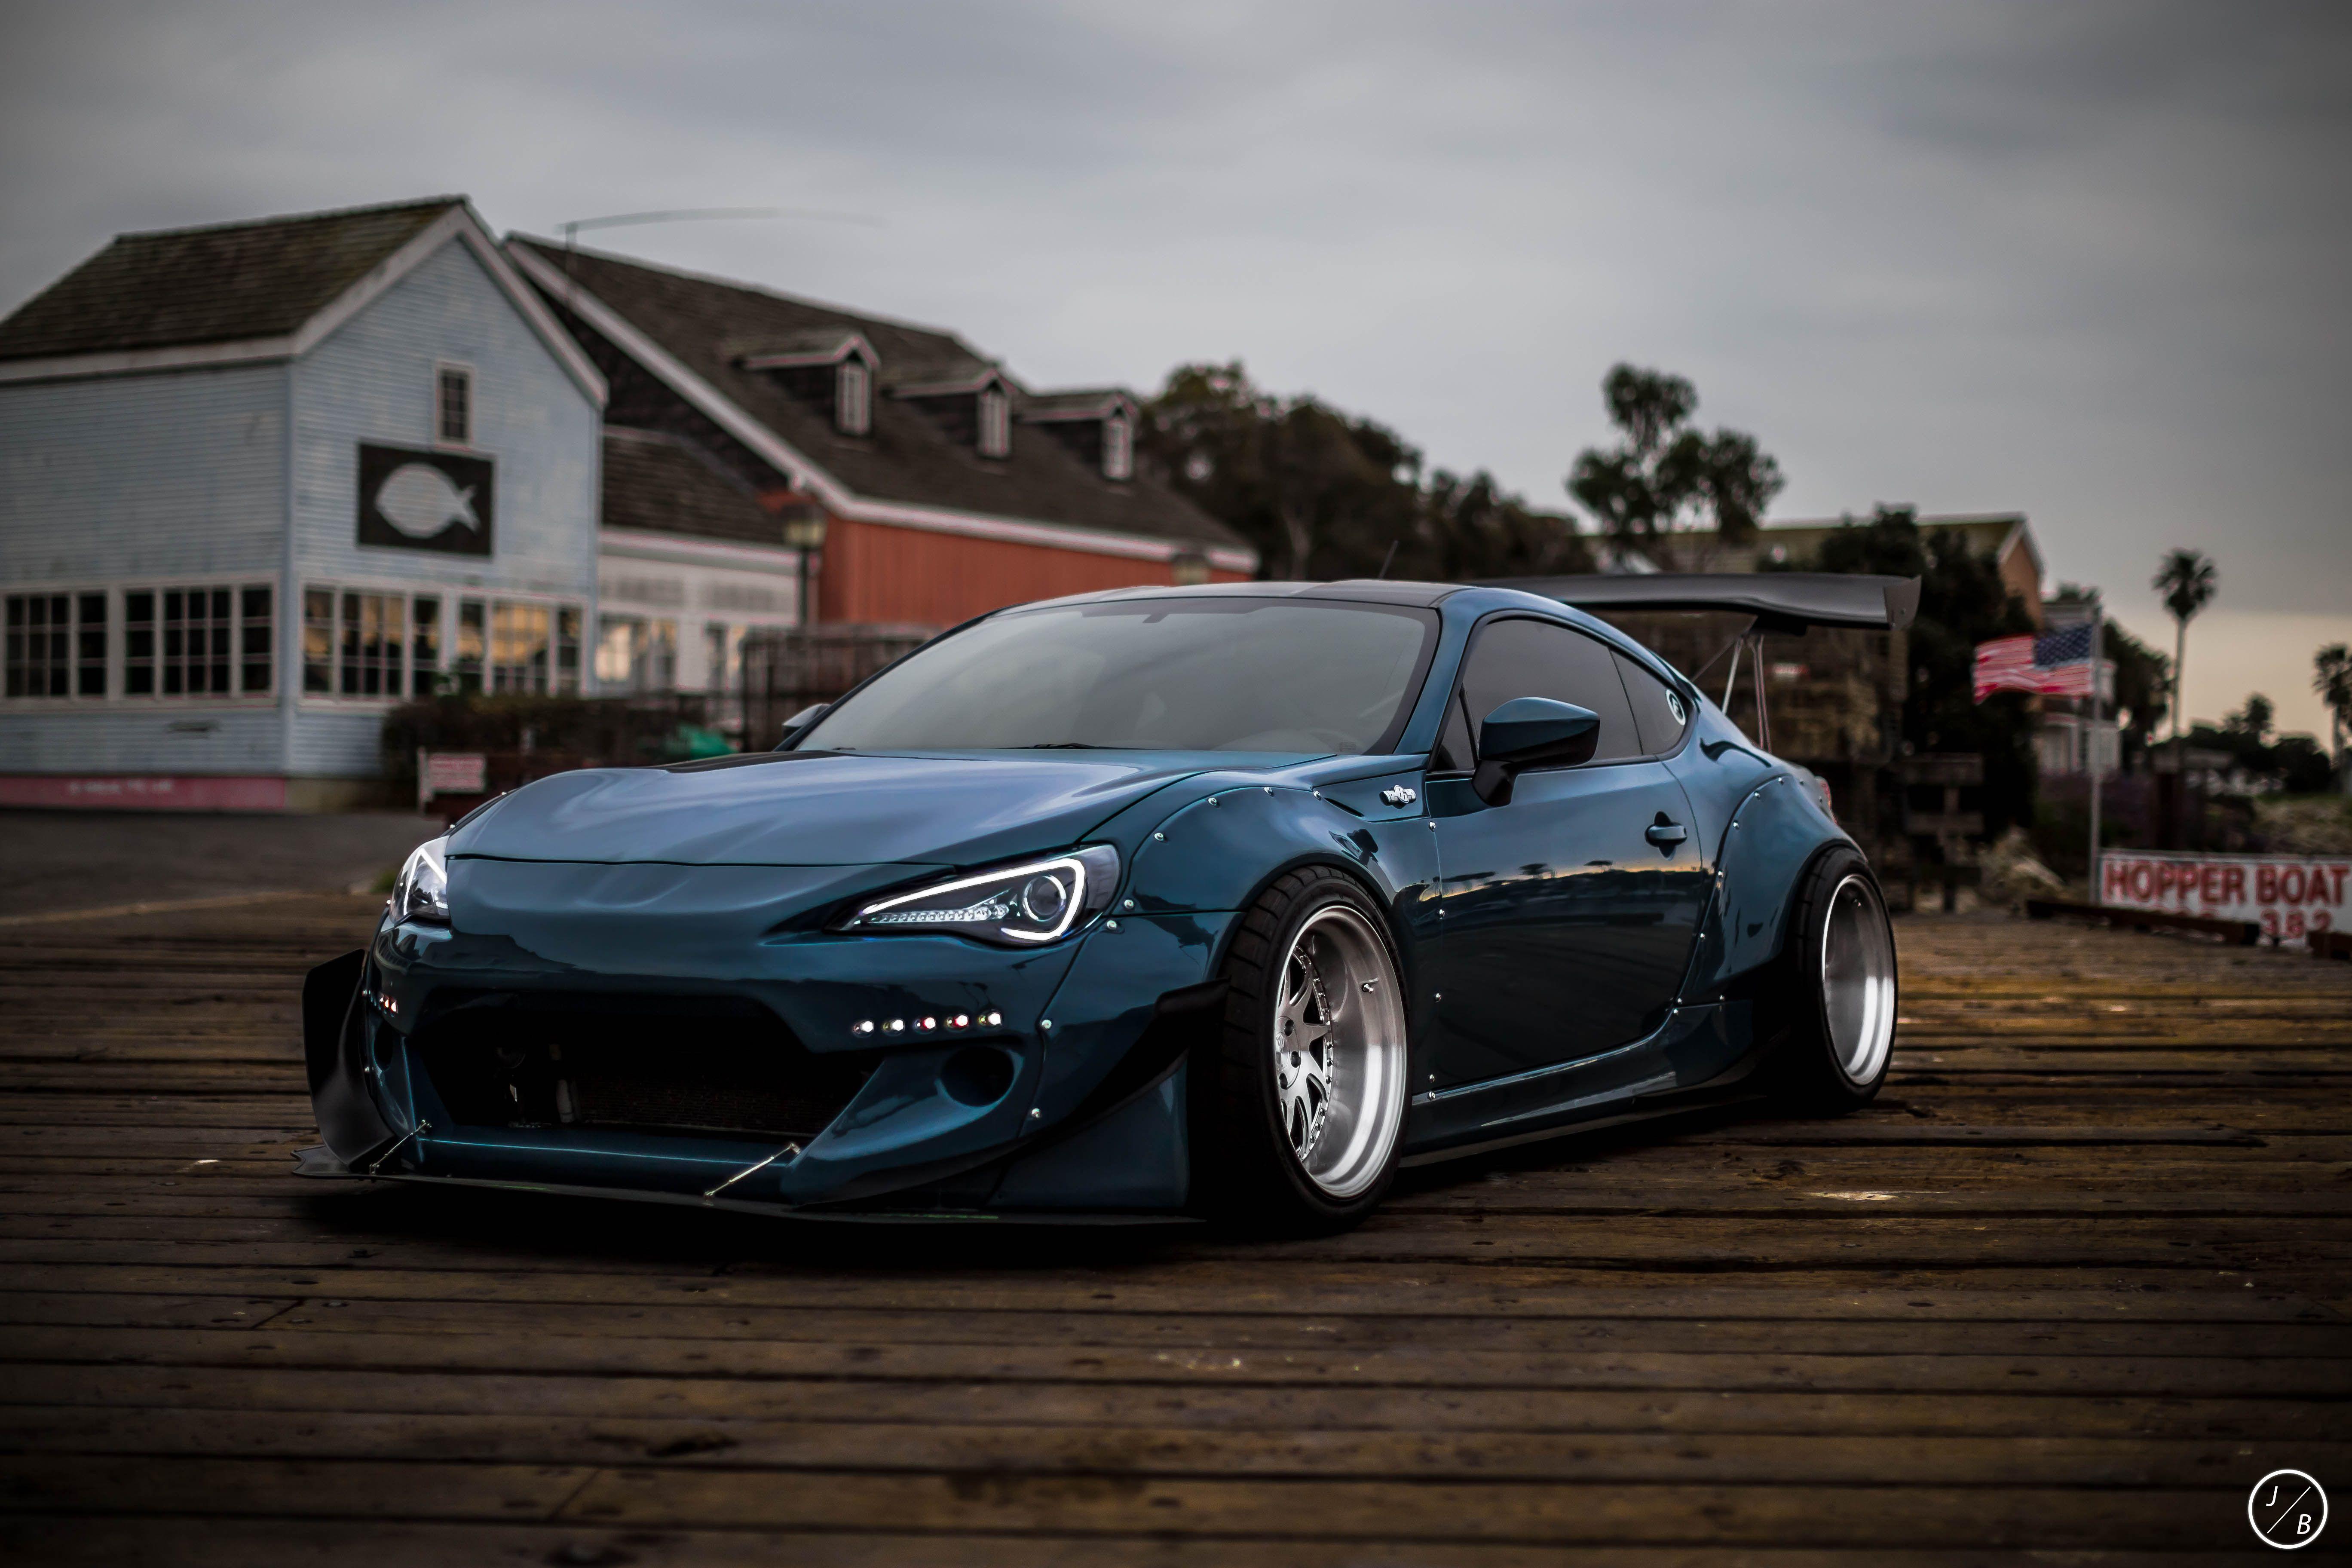 Sick Rocket bunny V2, speechless, no words to descrive this beauty